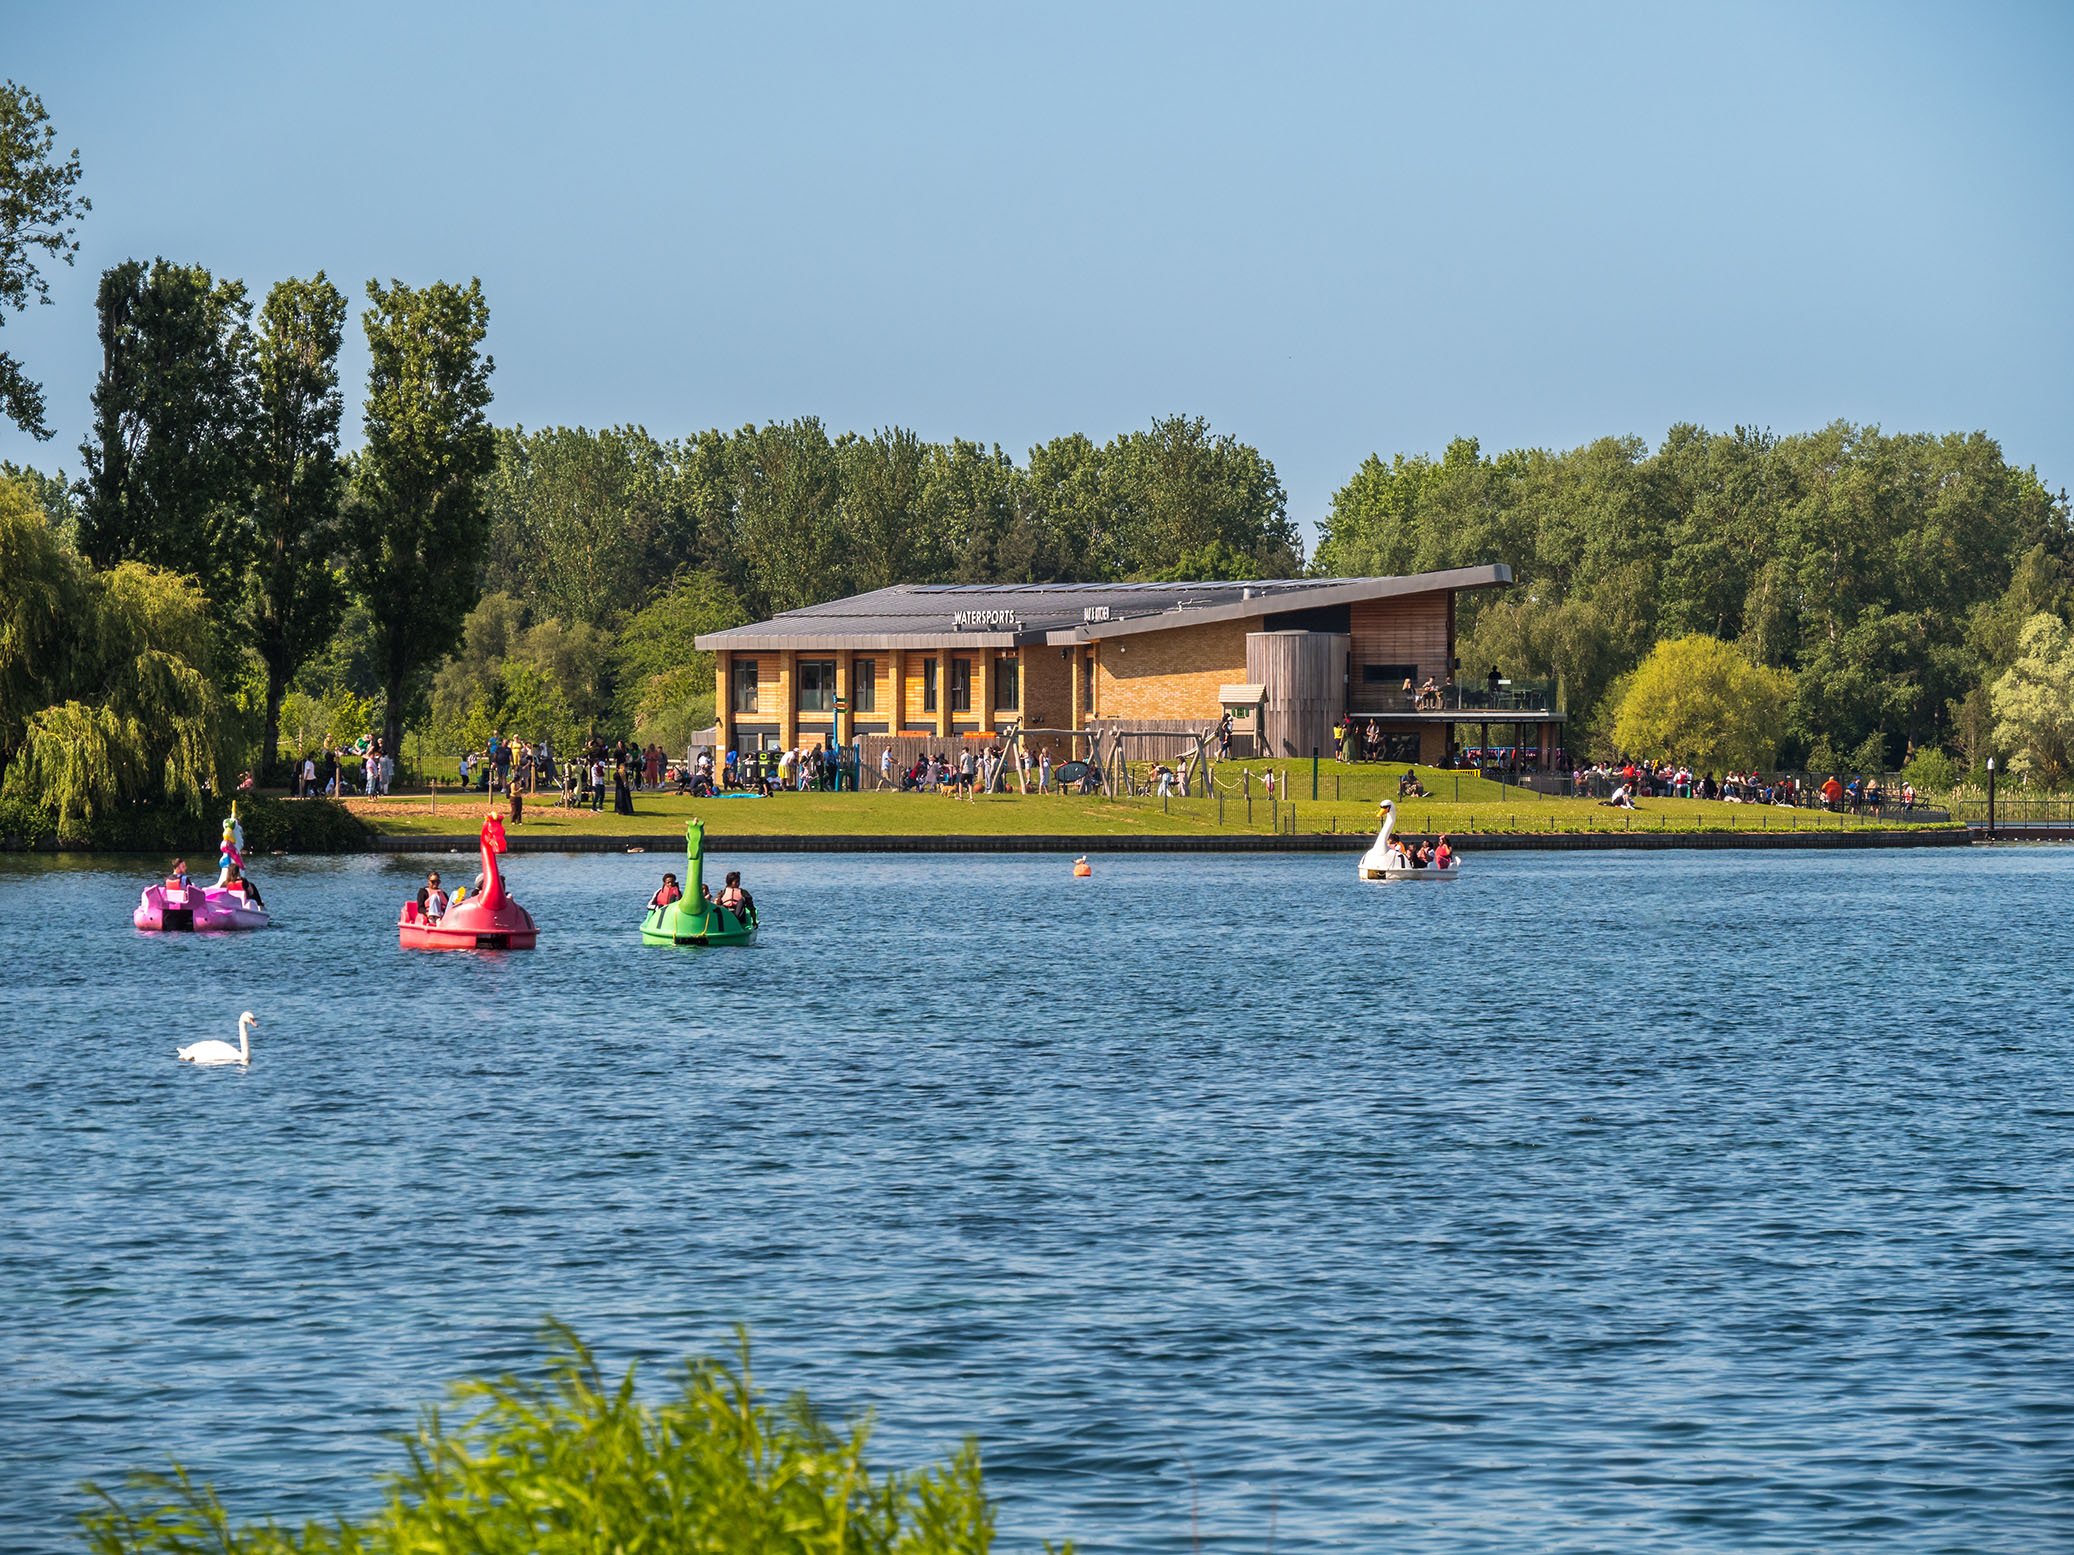 Fun times ahead at Willen Lake this Summer